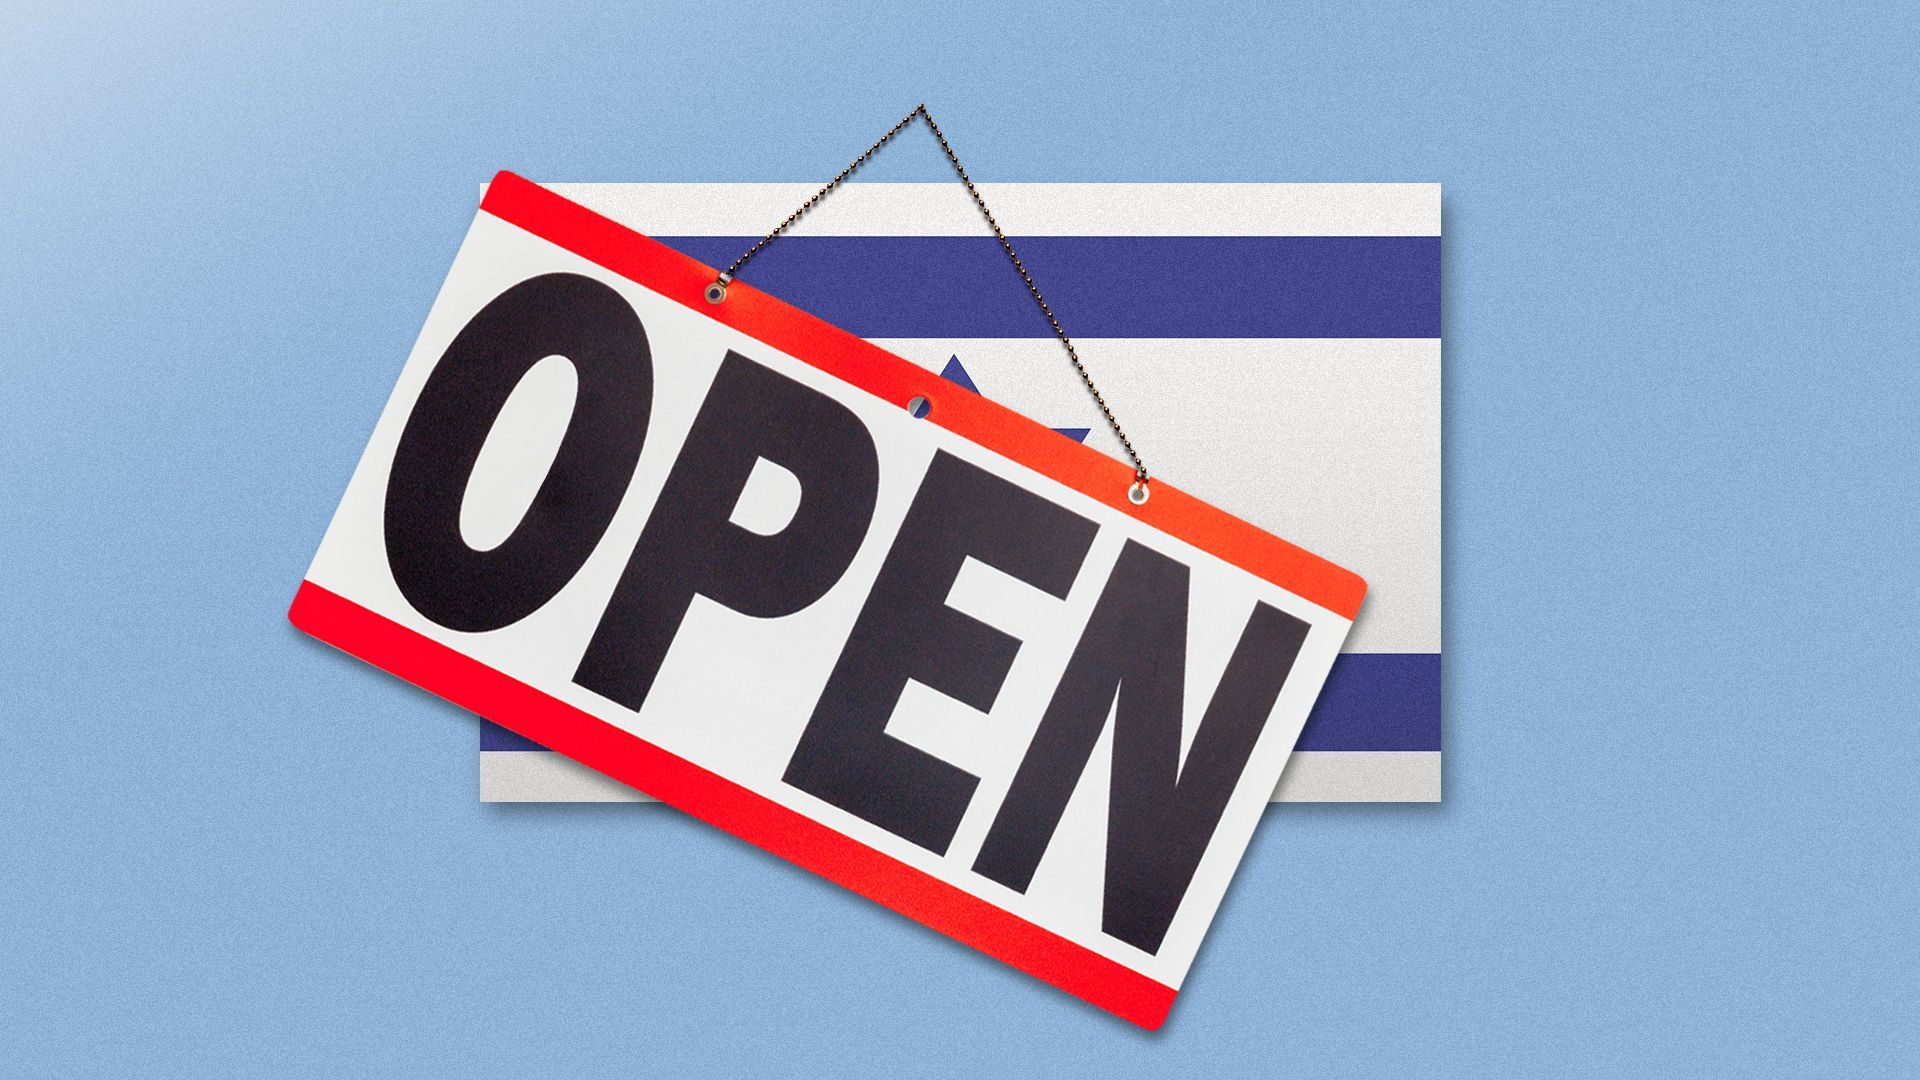 Illustration of a business "open" sign slipping to reveal an Israel flag